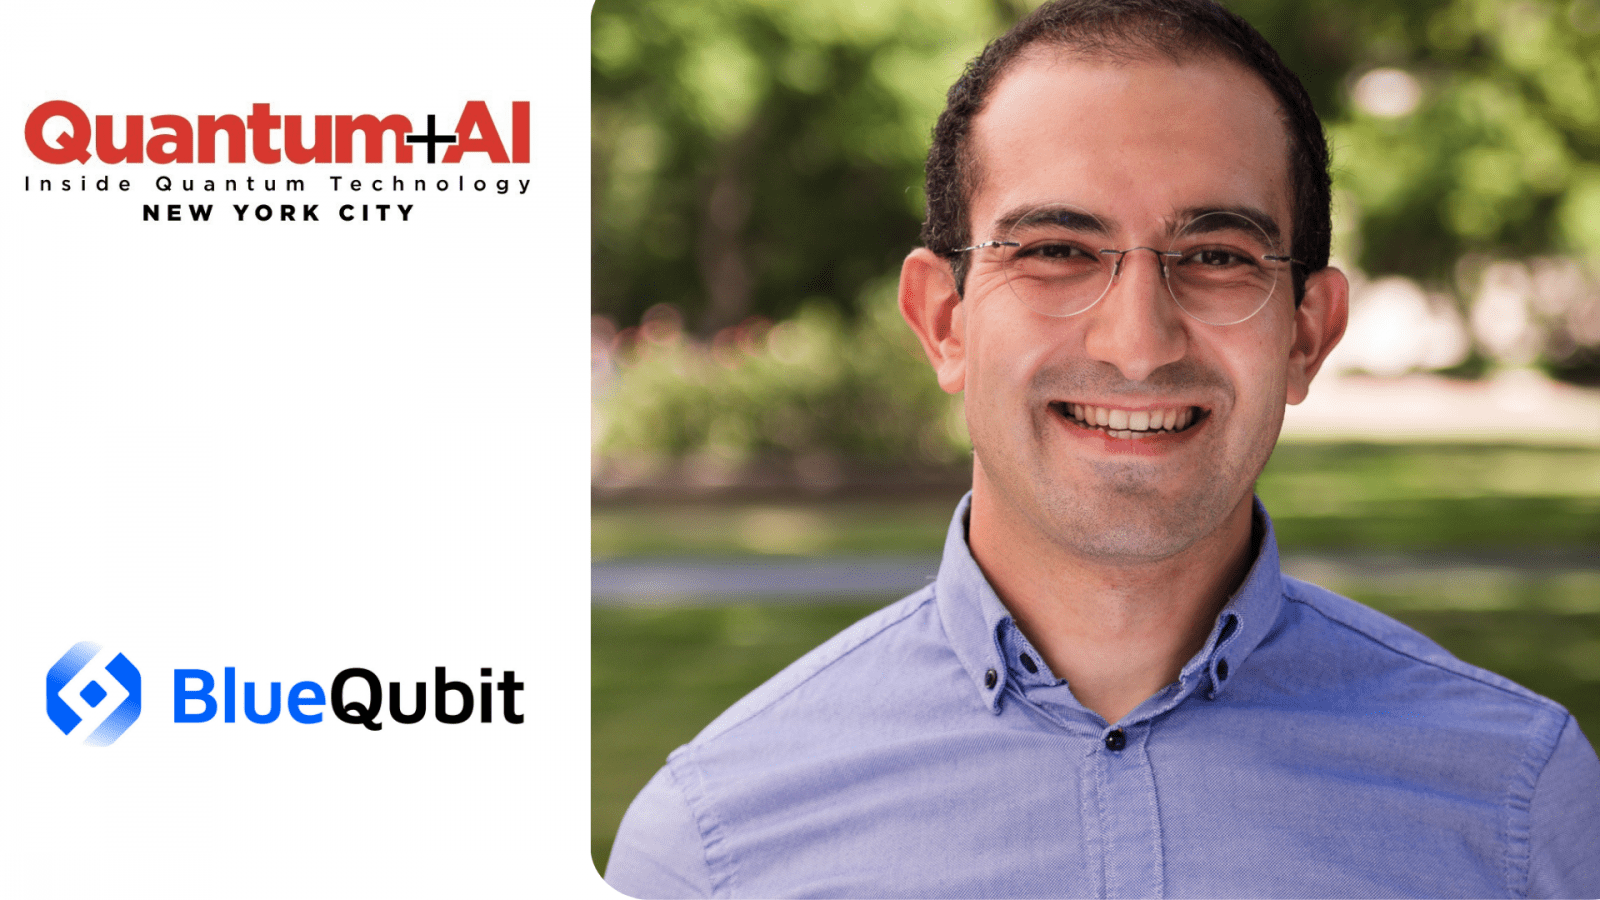 Hrant Gharibyan, CEO and Co-Founder of BlueQubit is a 2024 Speaker for the IQT Quantum plus AI conference in New York